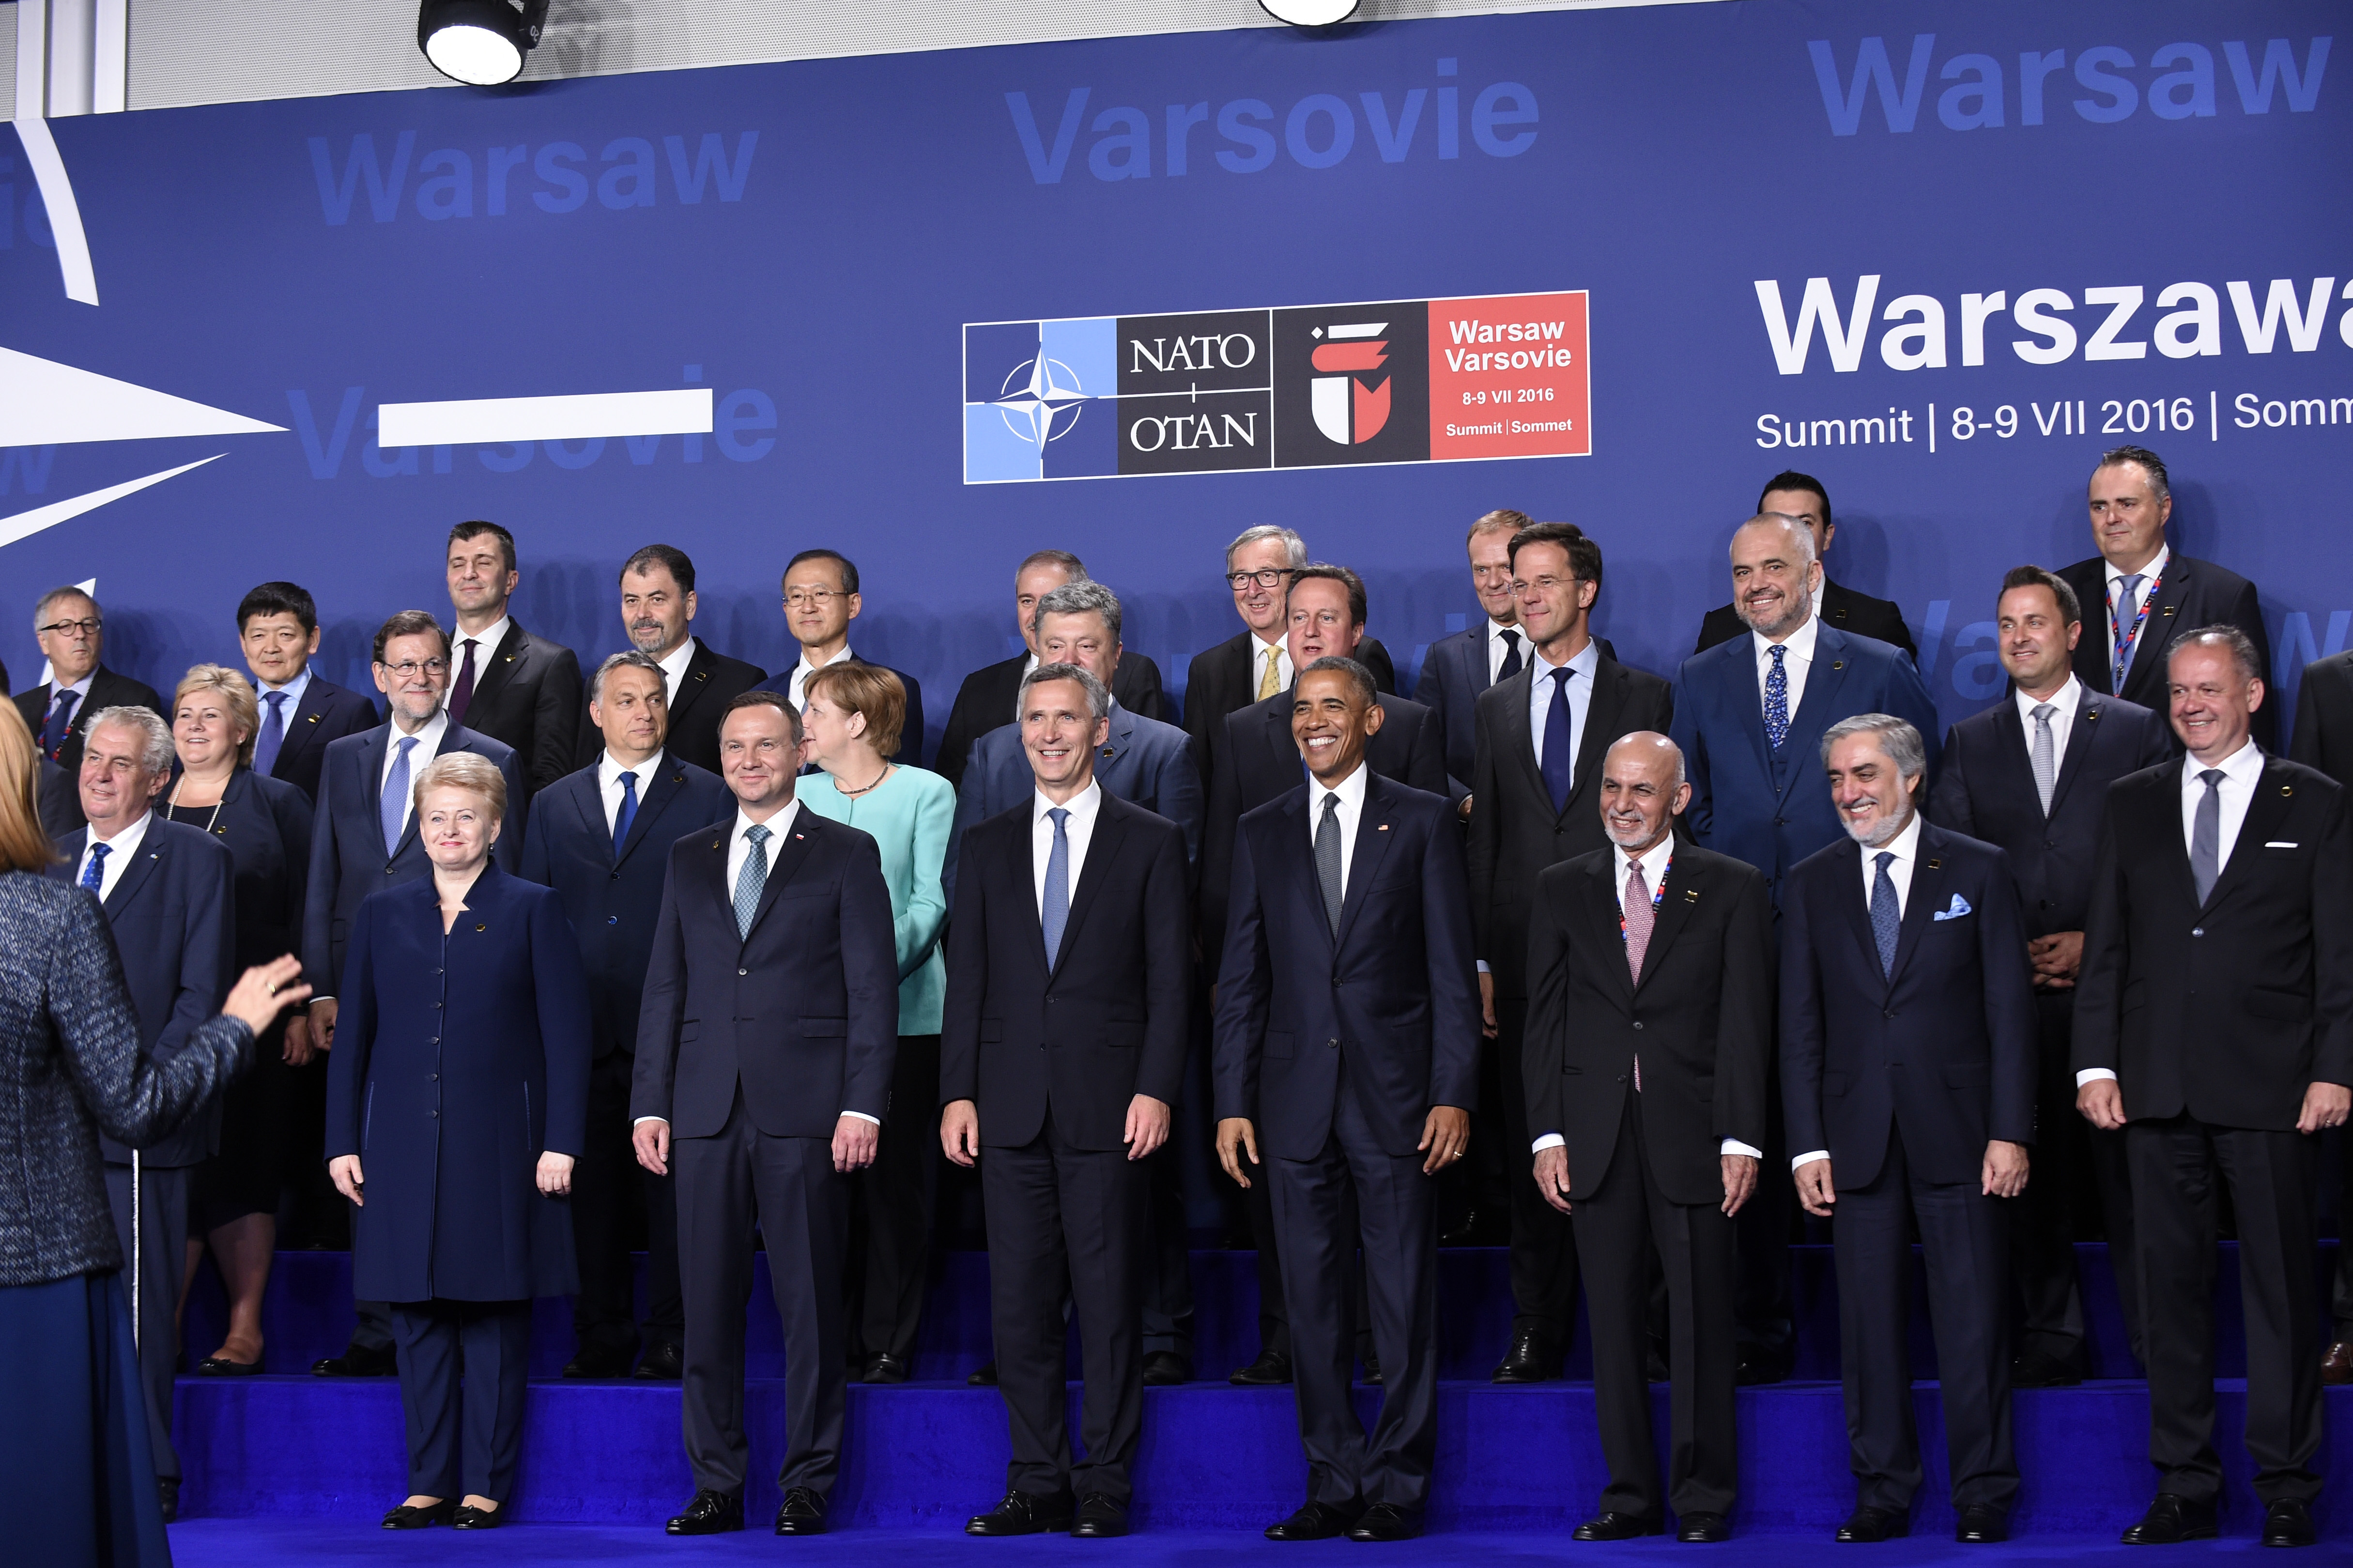 Serbian Defence Minister at the opening of the NATO Summit in Poland